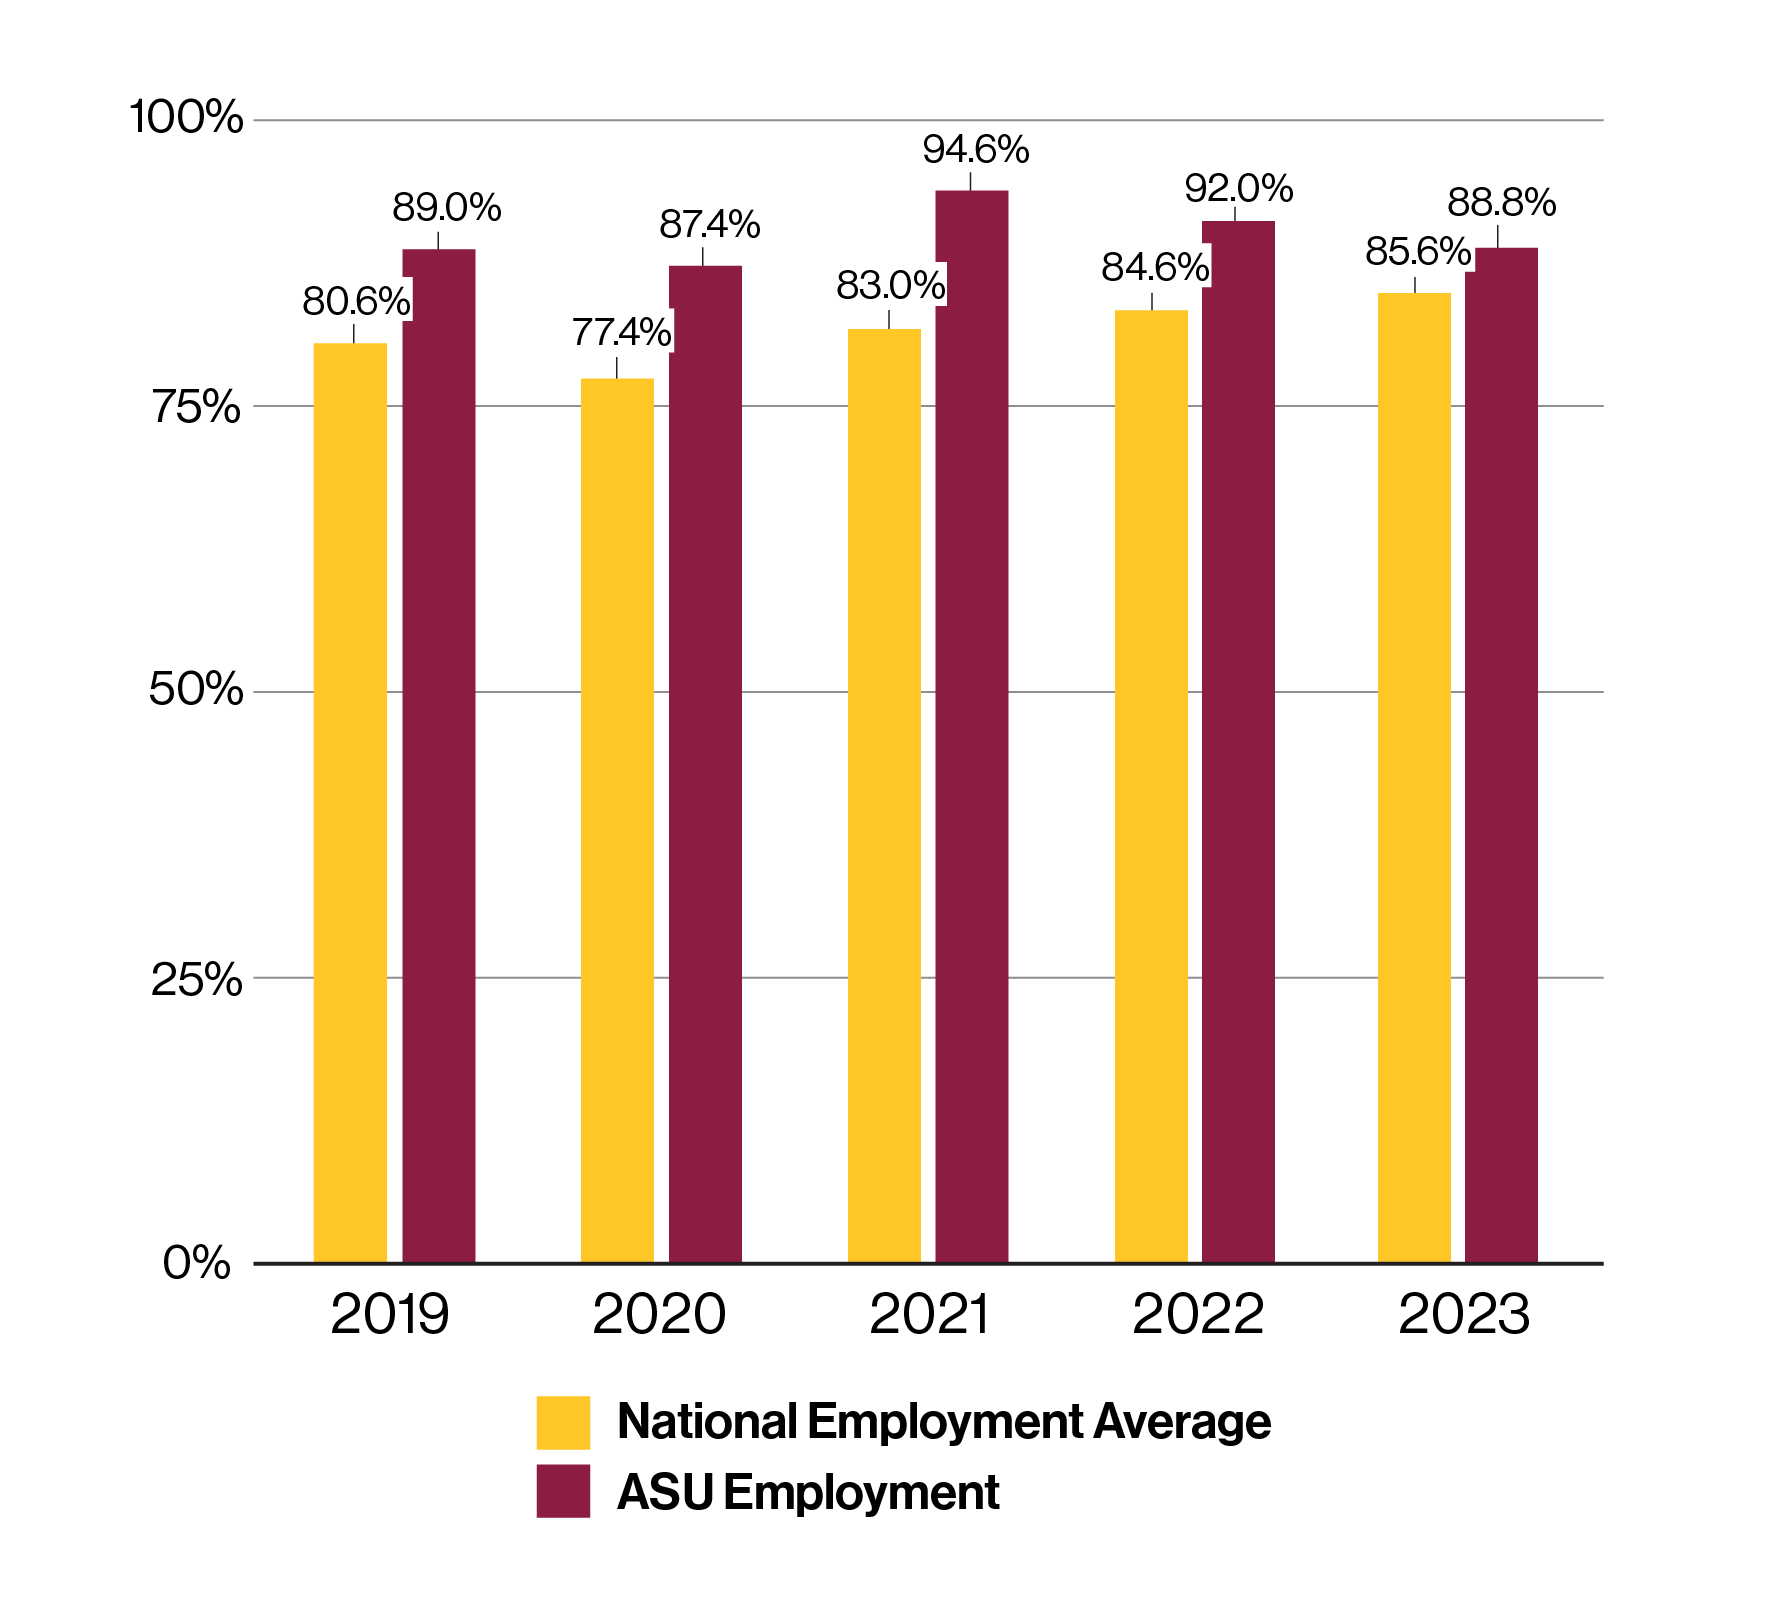 Five year employment summary starting 2018-2023; showing the 2023 national employment average at 85.6% and the ASU employment average as 88.8%.